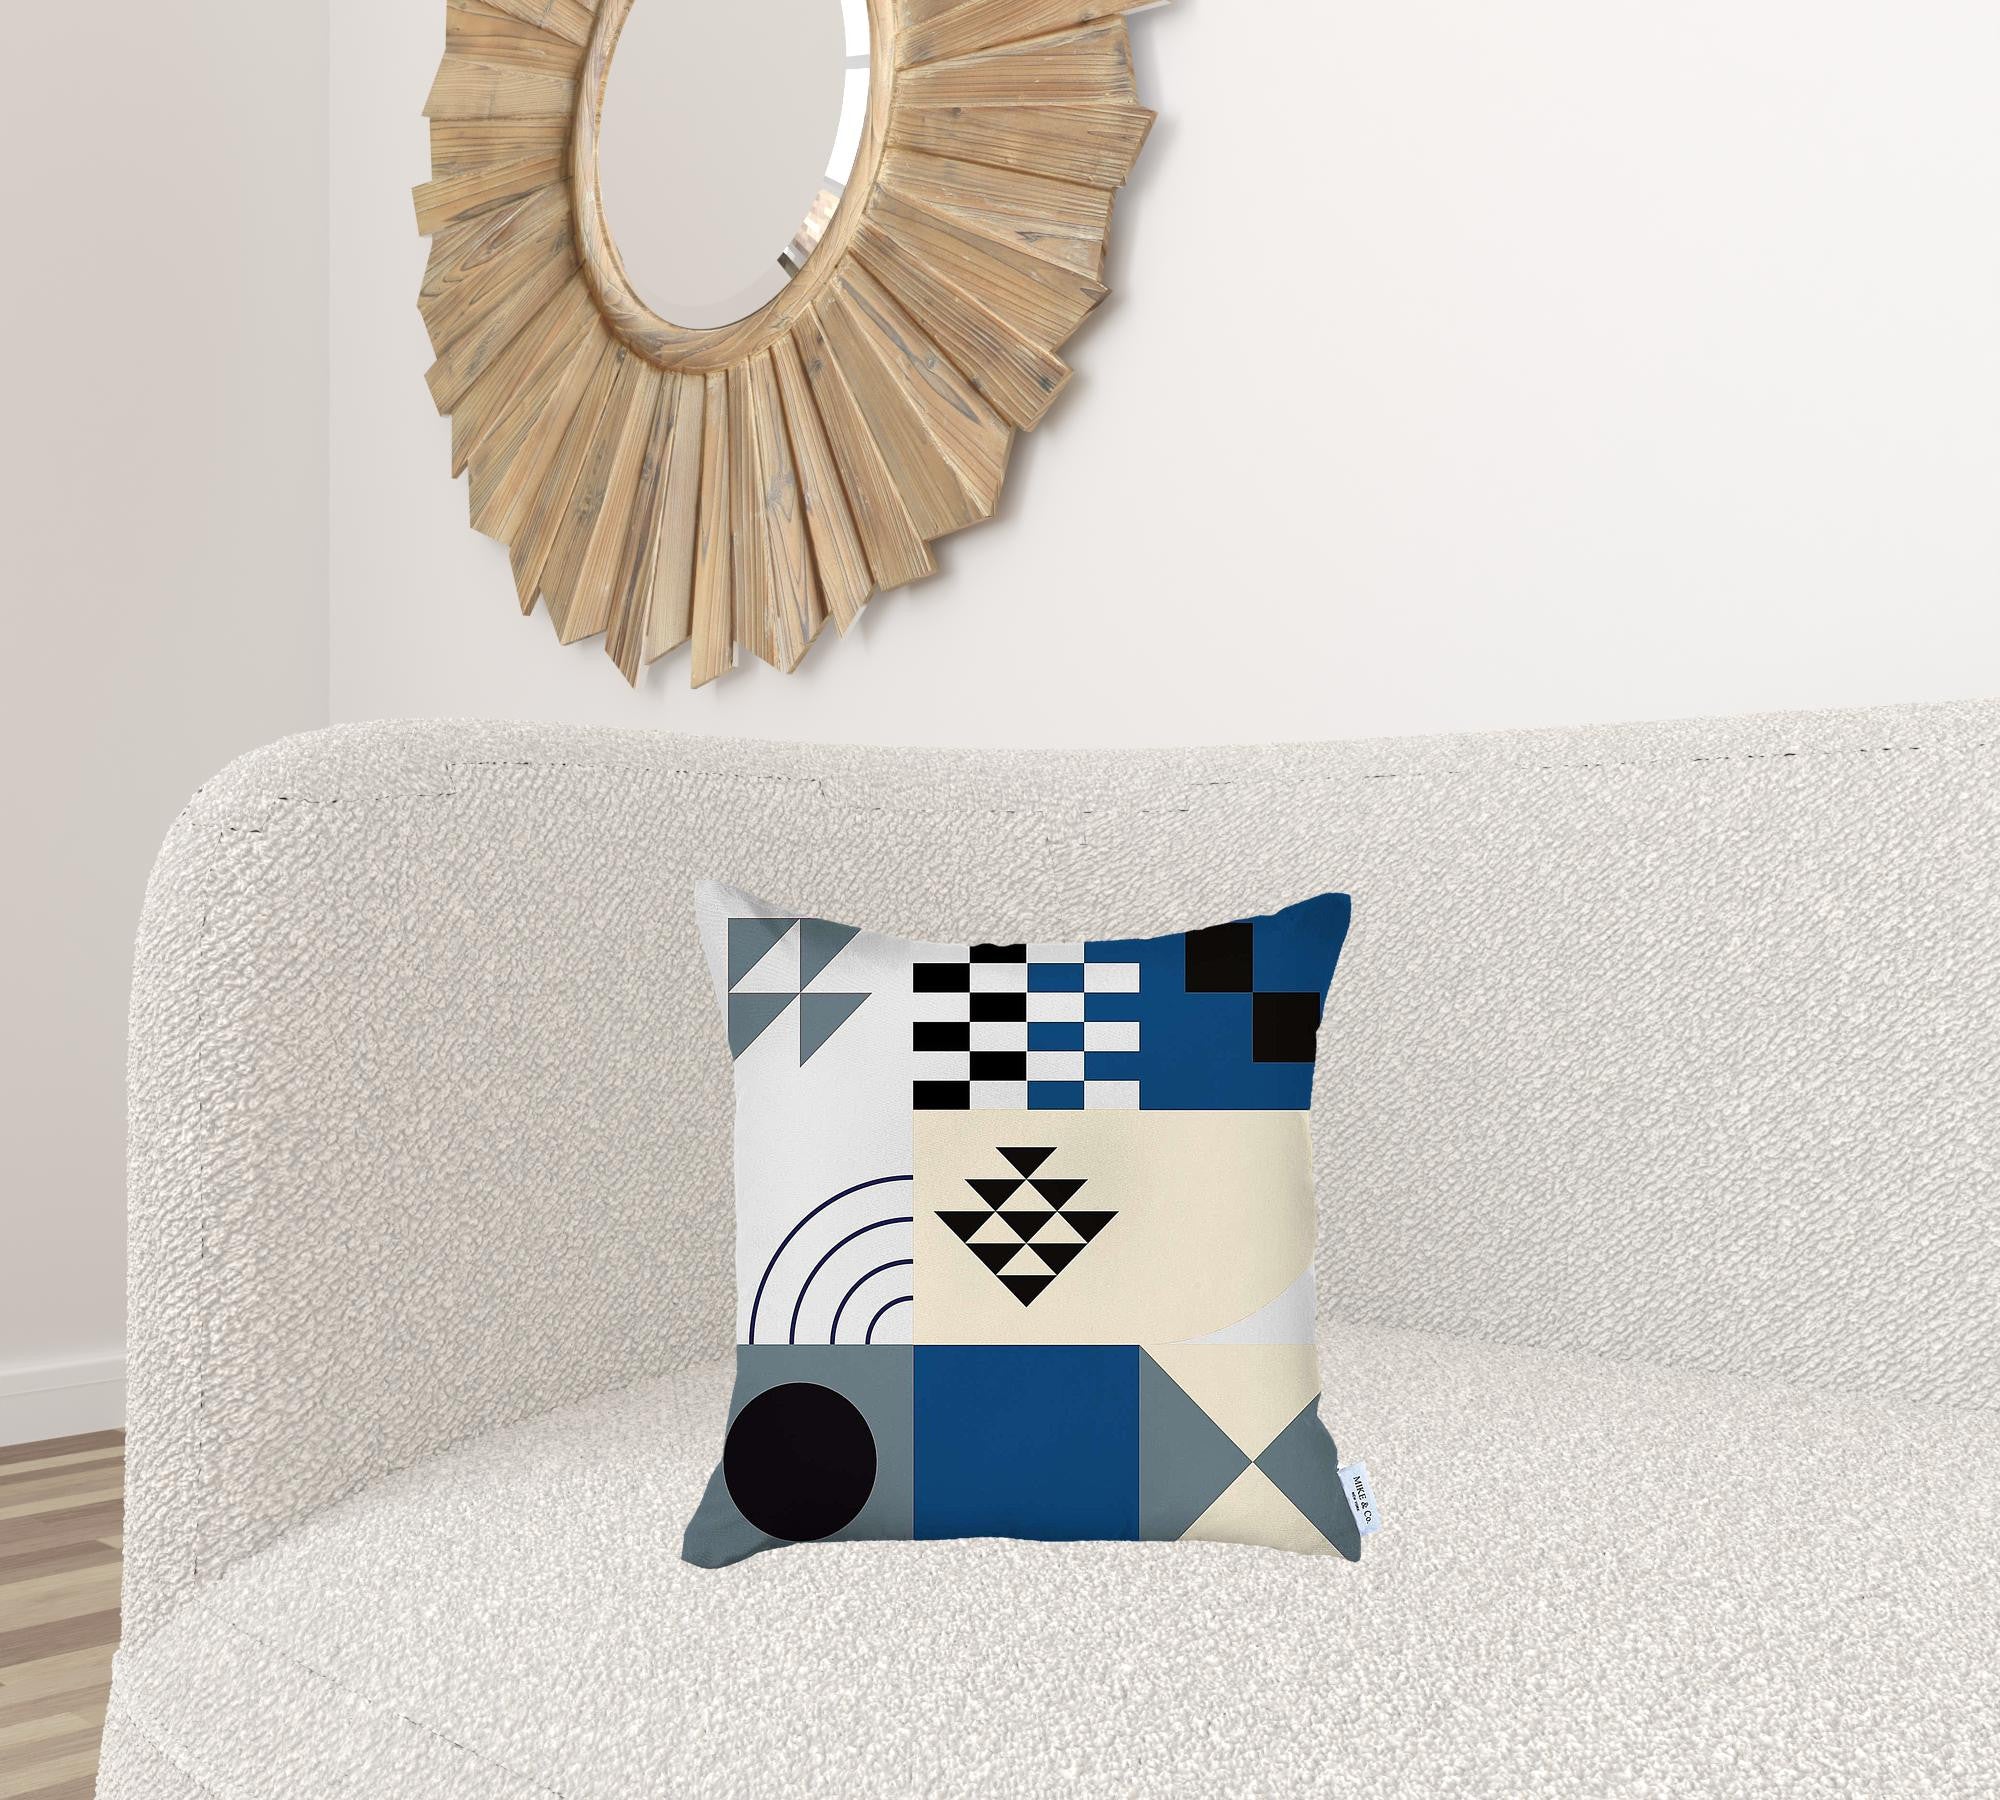 18" X 18" Blue And Black Abstract Zippered Handmade Polyester Throw Pillow Cover